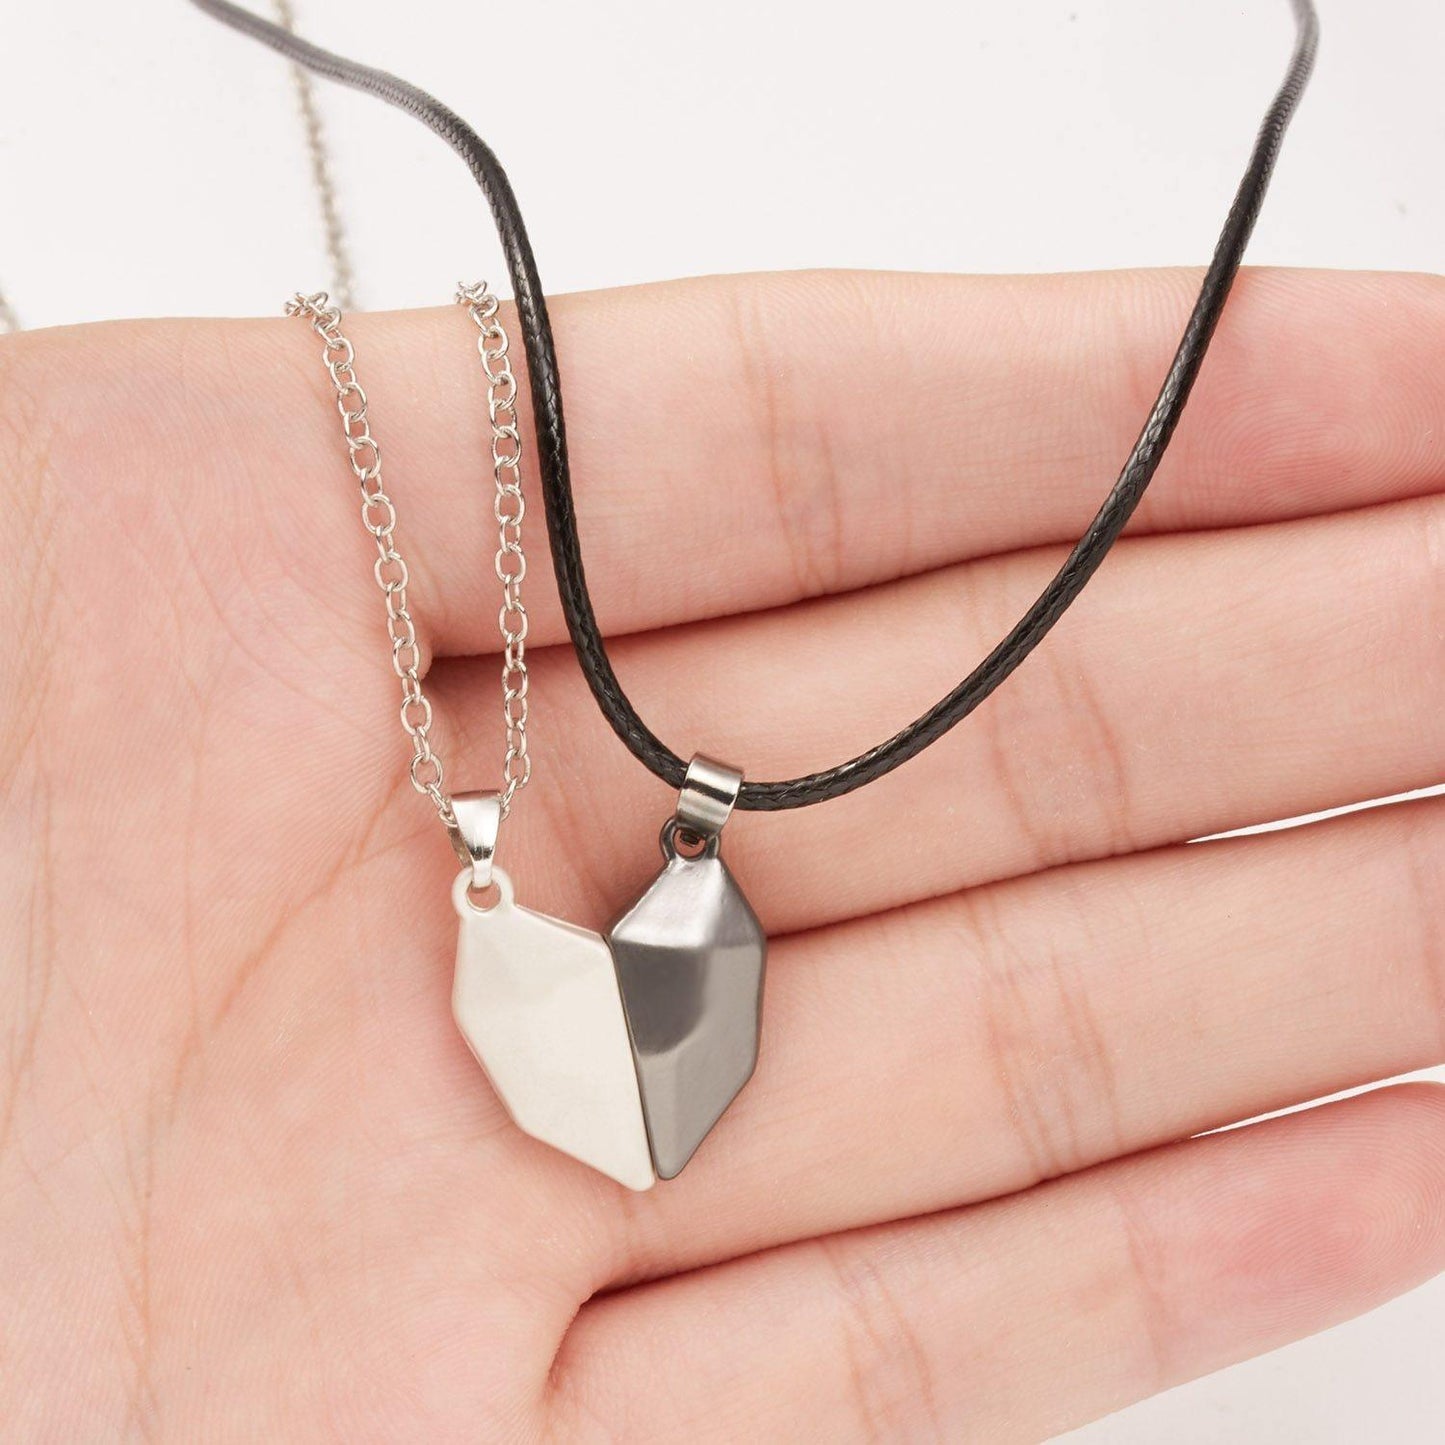 Couple Pendant Necklaces Gift To My Girlfriend for Christmas 2023 | Couple Pendant Necklaces Gift To My Girlfriend - undefined | gift ideas, Magnetic Couple Necklace, necklace, Necklaces | From Hunny Life | hunnylife.com